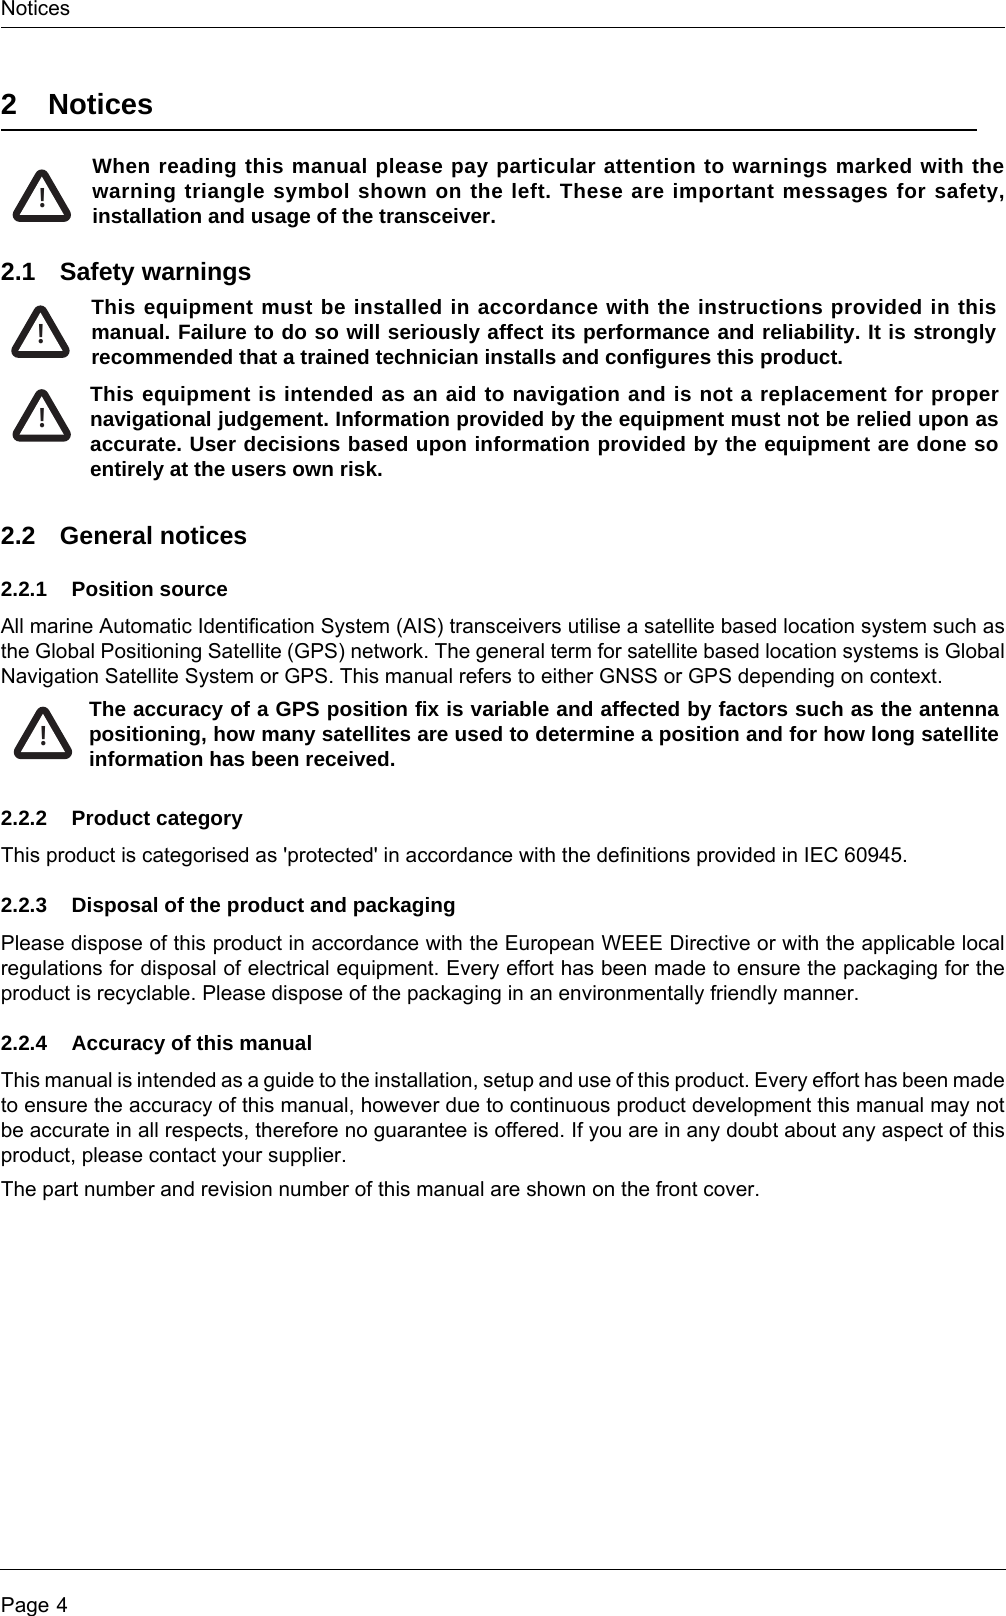 NoticesPage 42NoticesWhen reading this manual please pay particular attention to warnings marked with the warning triangle symbol shown on the left. These are important messages for safety, installation and usage of the transceiver.2.1 Safety warnings2.2 General notices2.2.1 Position sourceAll marine Automatic Identification System (AIS) transceivers utilise a satellite based location system such as the Global Positioning Satellite (GPS) network. The general term for satellite based location systems is Global Navigation Satellite System or GPS. This manual refers to either GNSS or GPS depending on context.2.2.2 Product categoryThis product is categorised as &apos;protected&apos; in accordance with the definitions provided in IEC 60945.2.2.3 Disposal of the product and packagingPlease dispose of this product in accordance with the European WEEE Directive or with the applicable local regulations for disposal of electrical equipment. Every effort has been made to ensure the packaging for the product is recyclable. Please dispose of the packaging in an environmentally friendly manner.2.2.4 Accuracy of this manualThis manual is intended as a guide to the installation, setup and use of this product. Every effort has been made to ensure the accuracy of this manual, however due to continuous product development this manual may not be accurate in all respects, therefore no guarantee is offered. If you are in any doubt about any aspect of this product, please contact your supplier.The part number and revision number of this manual are shown on the front cover.!This equipment must be installed in accordance with the instructions provided in this manual. Failure to do so will seriously affect its performance and reliability. It is strongly recommended that a trained technician installs and configures this product.This equipment is intended as an aid to navigation and is not a replacement for proper navigational judgement. Information provided by the equipment must not be relied upon as accurate. User decisions based upon information provided by the equipment are done so entirely at the users own risk.!!The accuracy of a GPS position fix is variable and affected by factors such as the antenna positioning, how many satellites are used to determine a position and for how long satellite information has been received.!